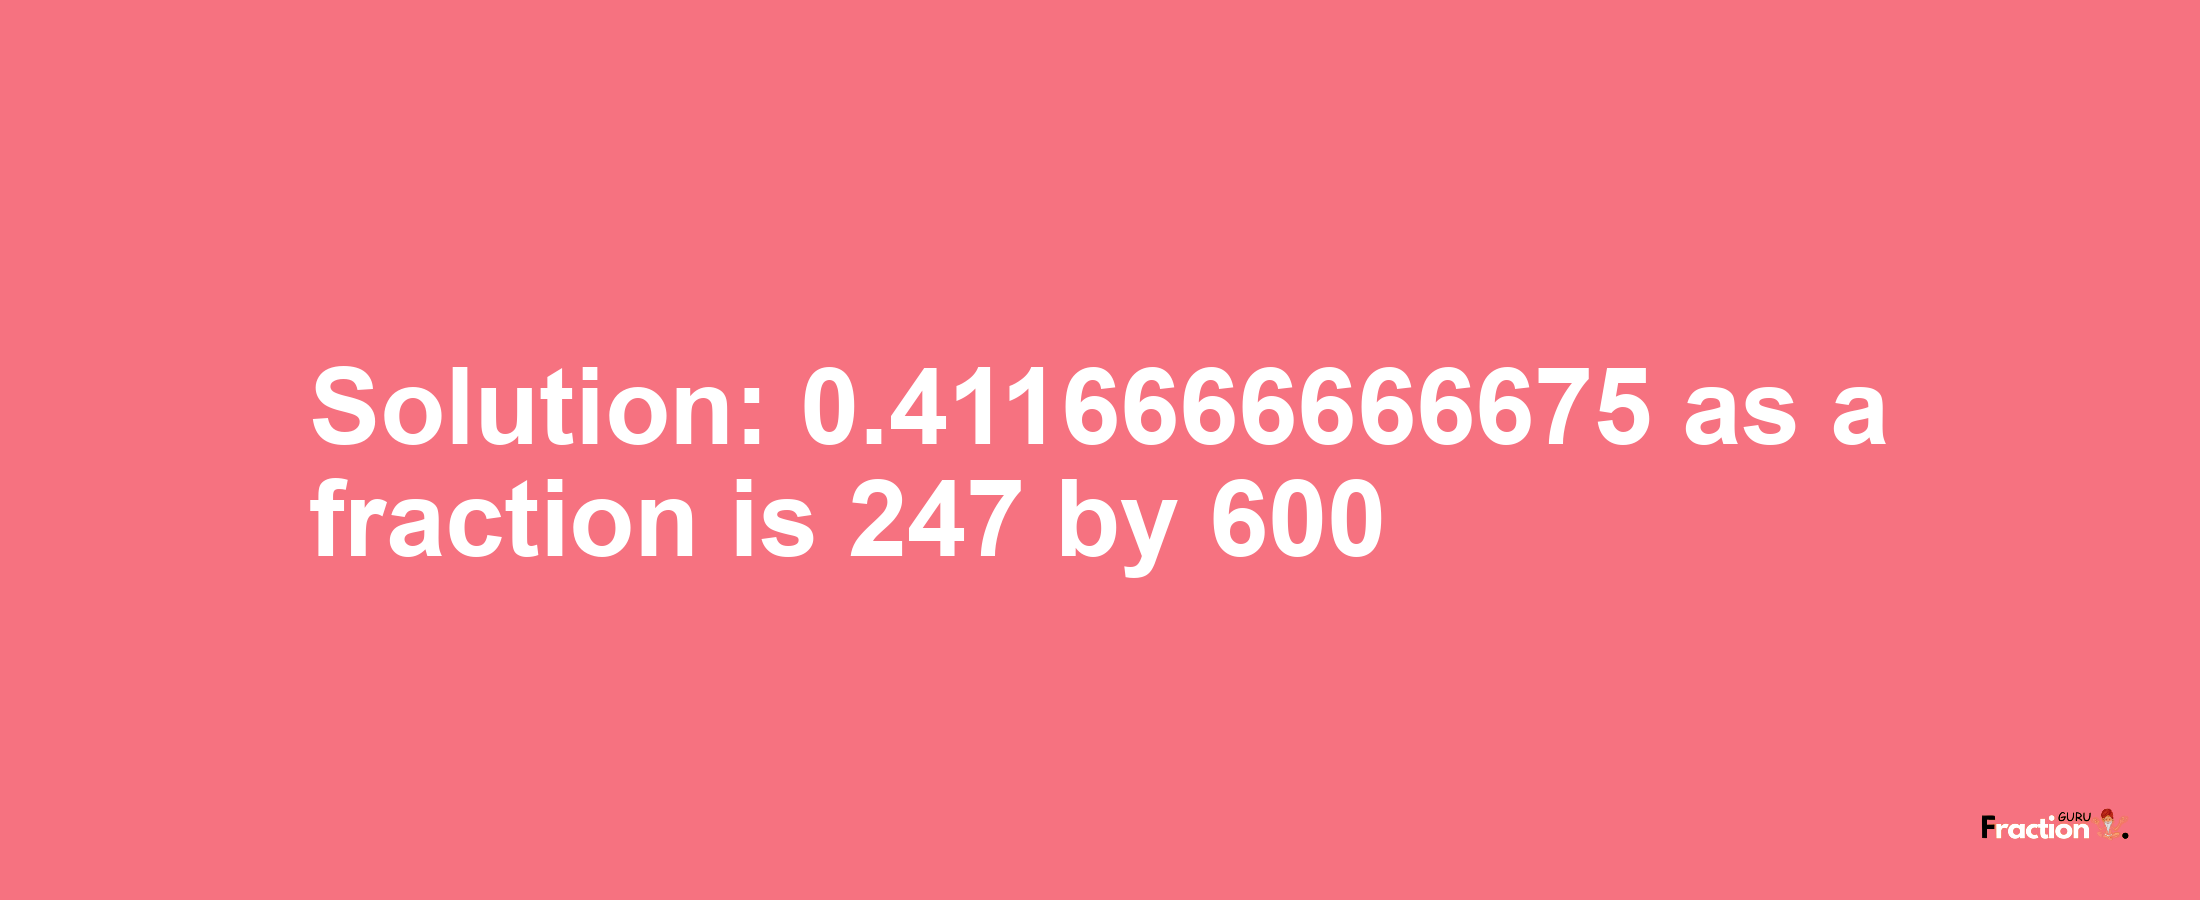 Solution:0.4116666666675 as a fraction is 247/600